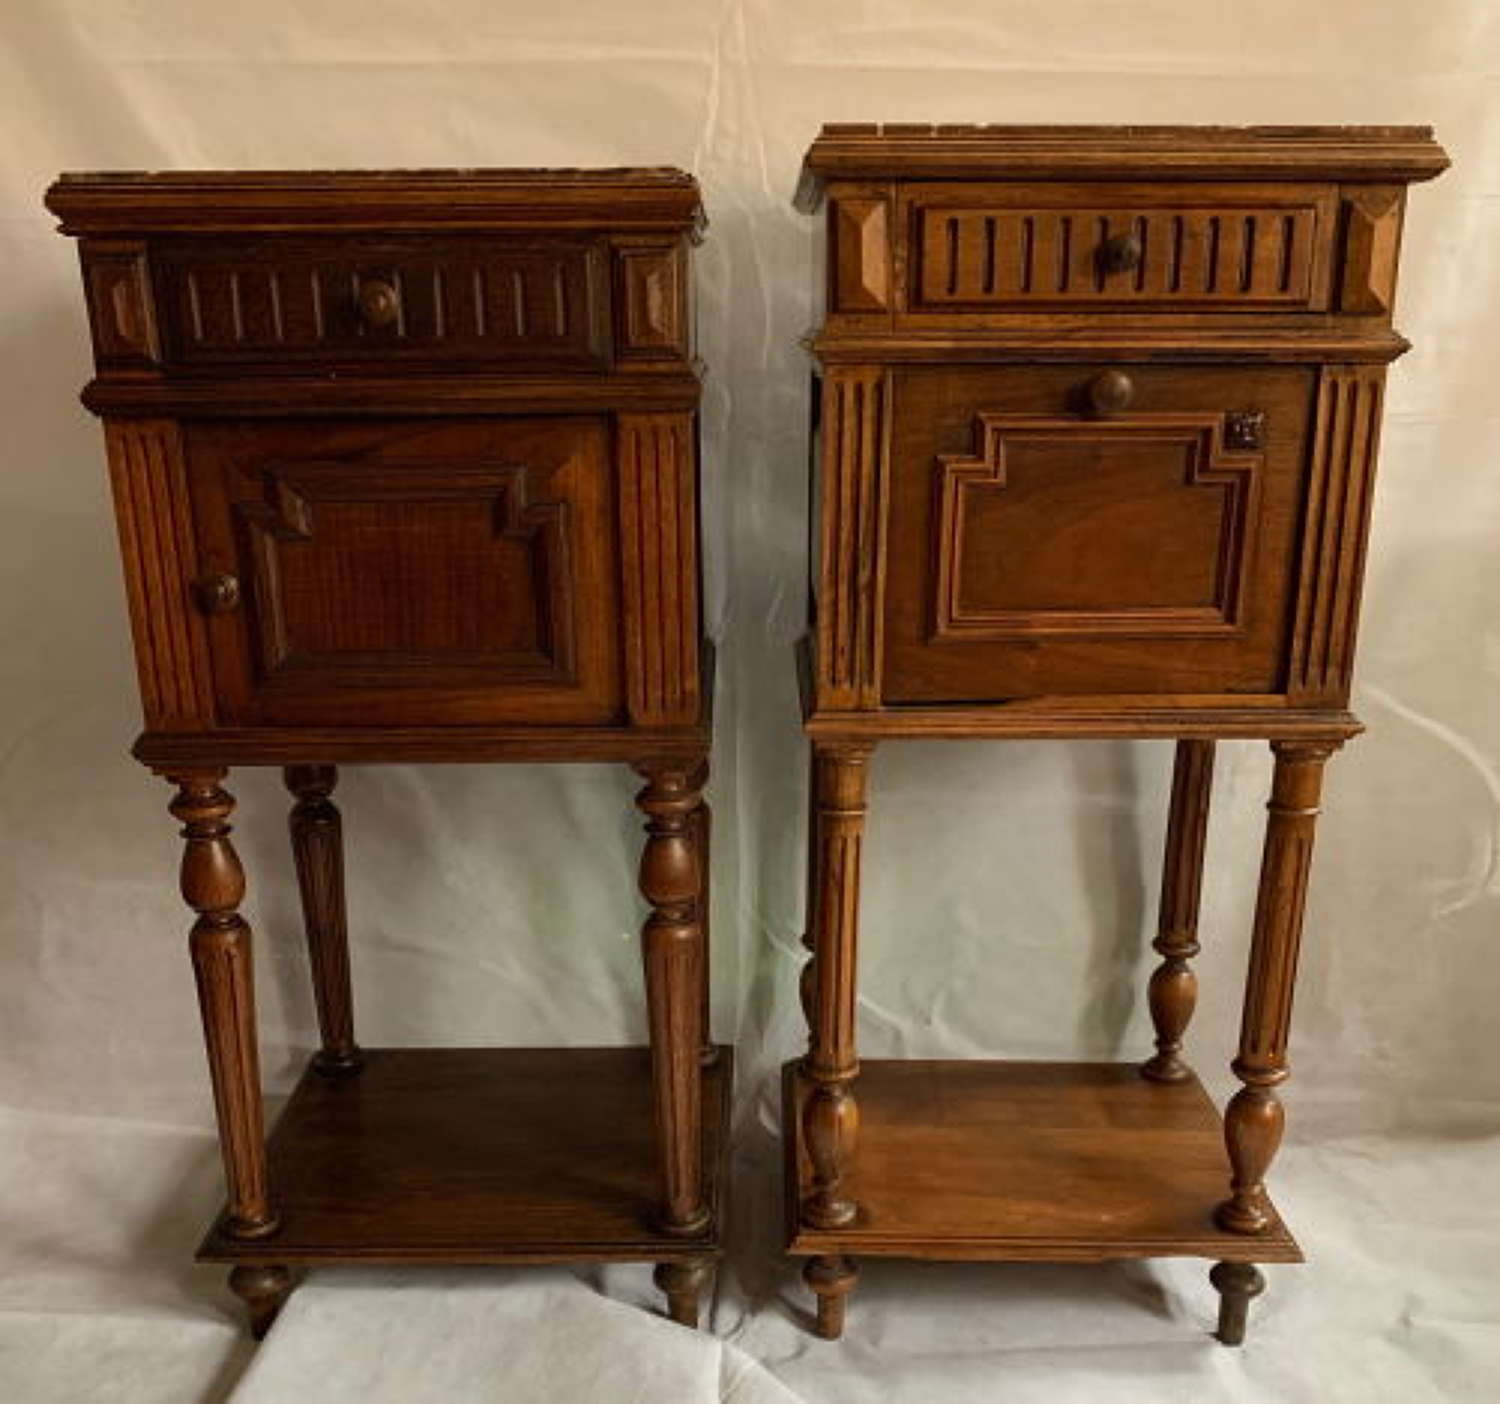 Near Pair of Wooden Bedside Tables